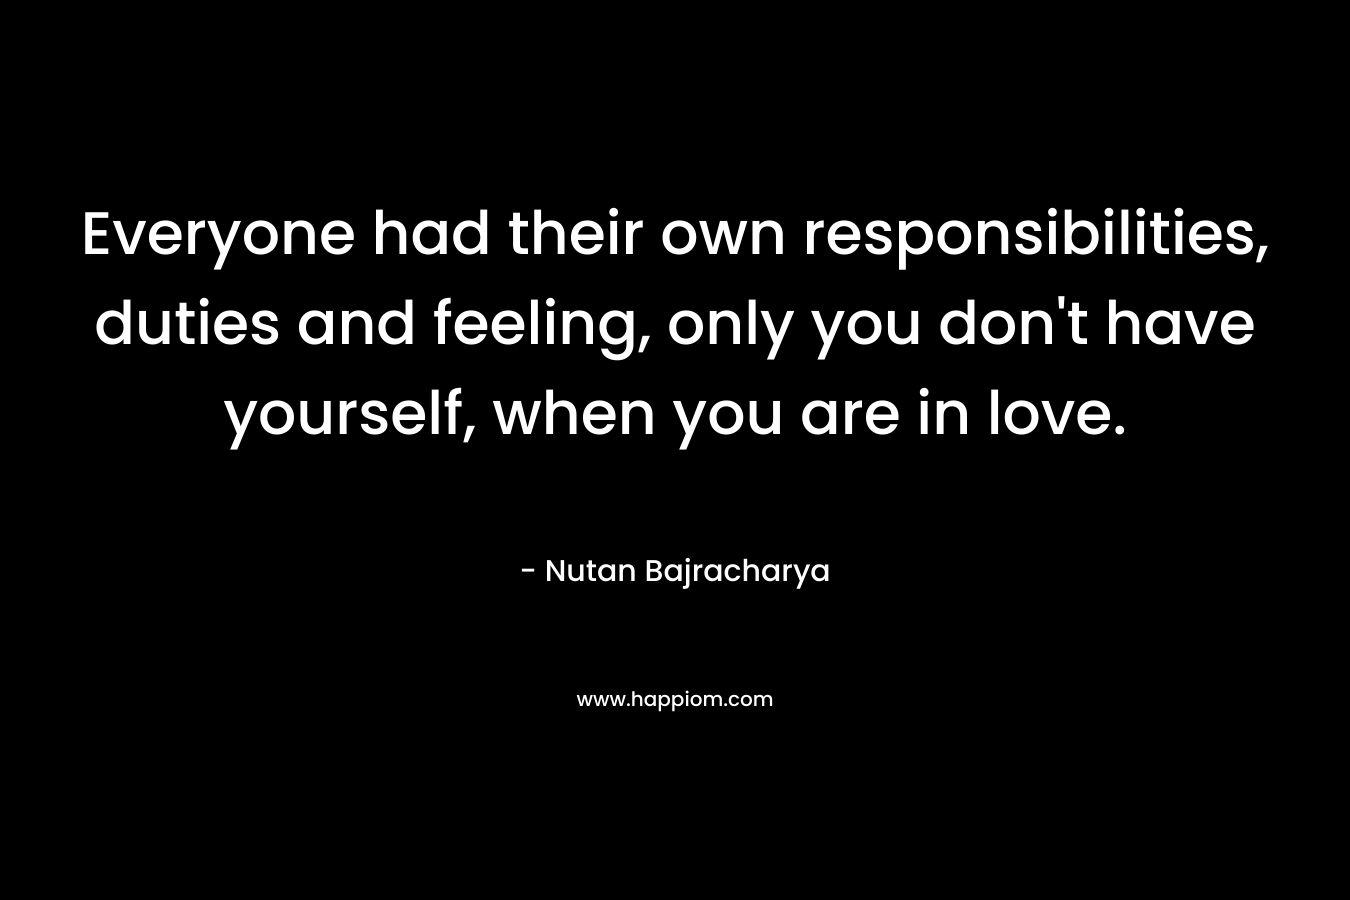 Everyone had their own responsibilities, duties and feeling, only you don’t have yourself, when you are in love. – Nutan Bajracharya